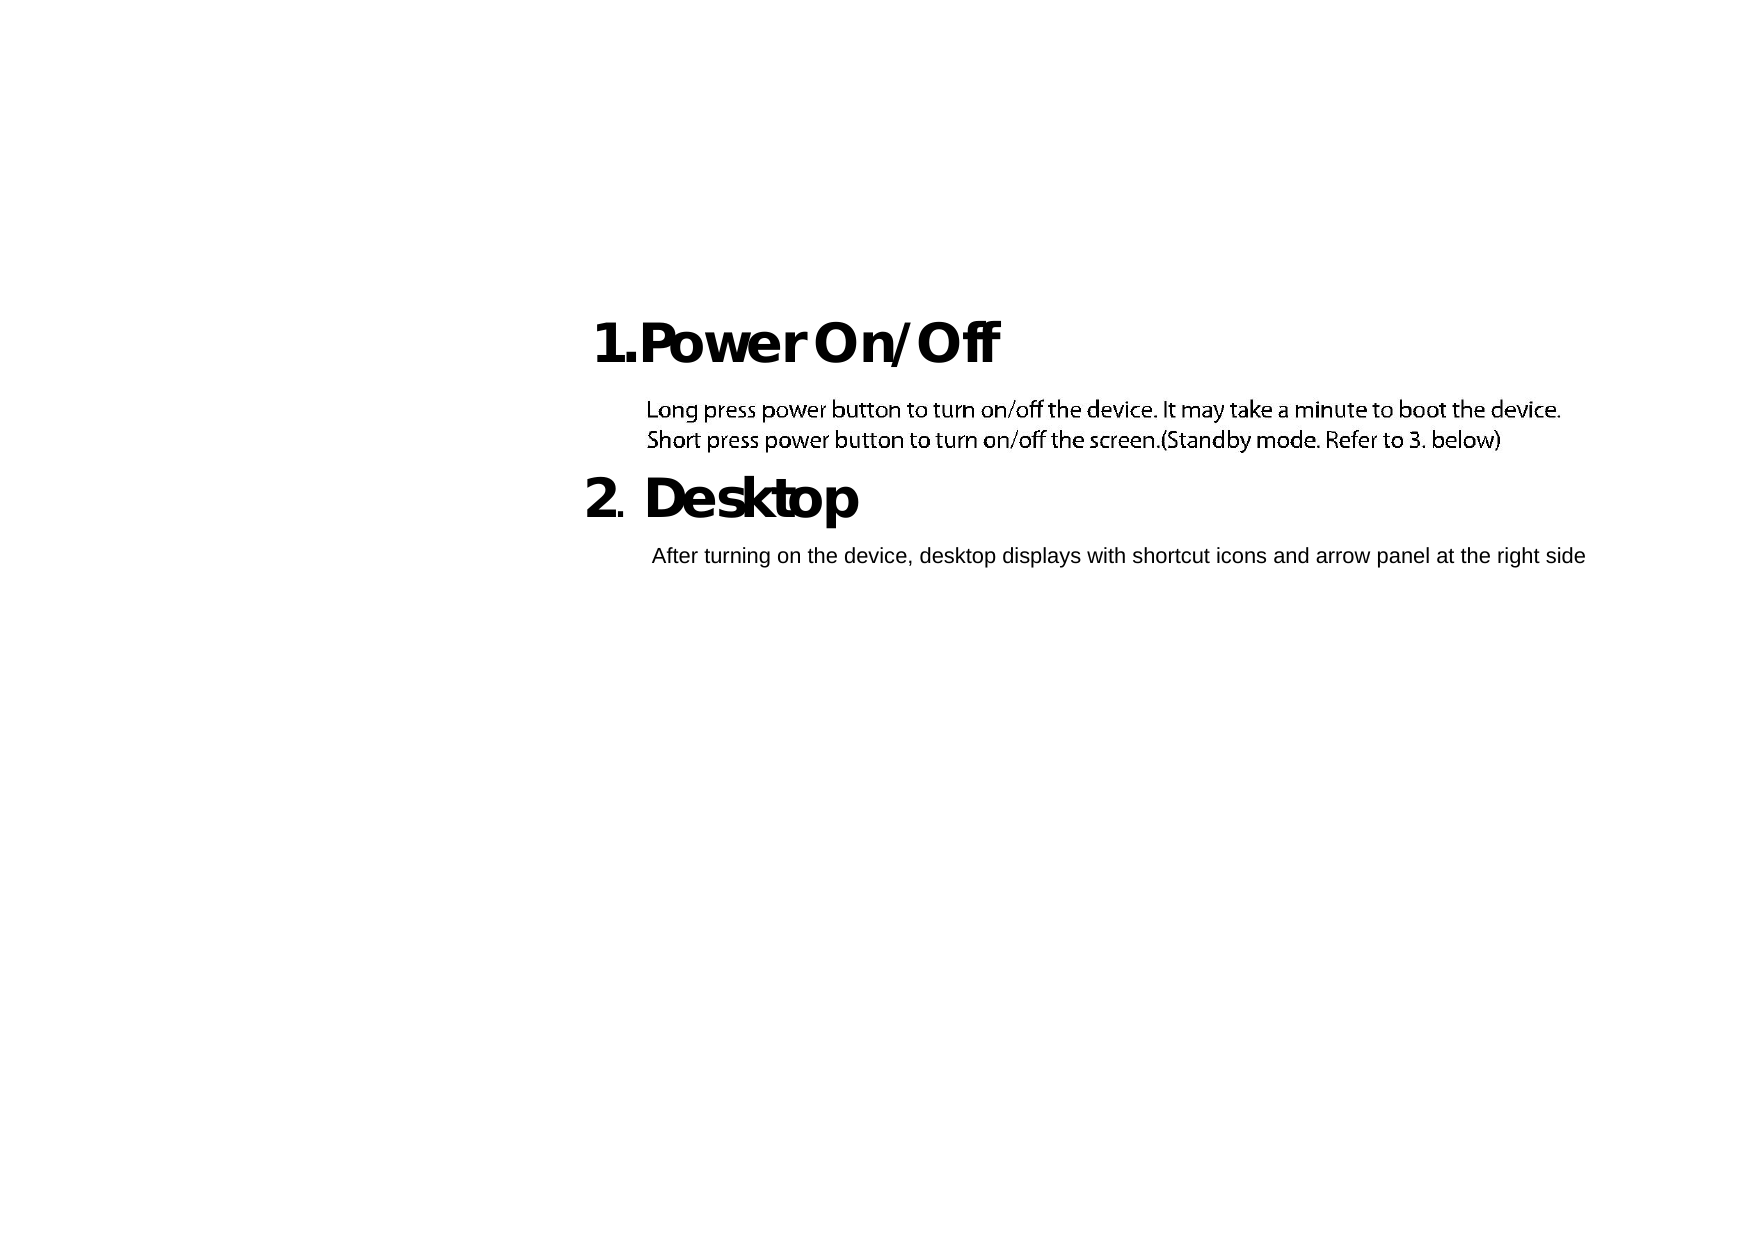    1. Power On/Off     2. Desktop  After turning on the device, desktop displays with shortcut icons and arrow panel at the right side 